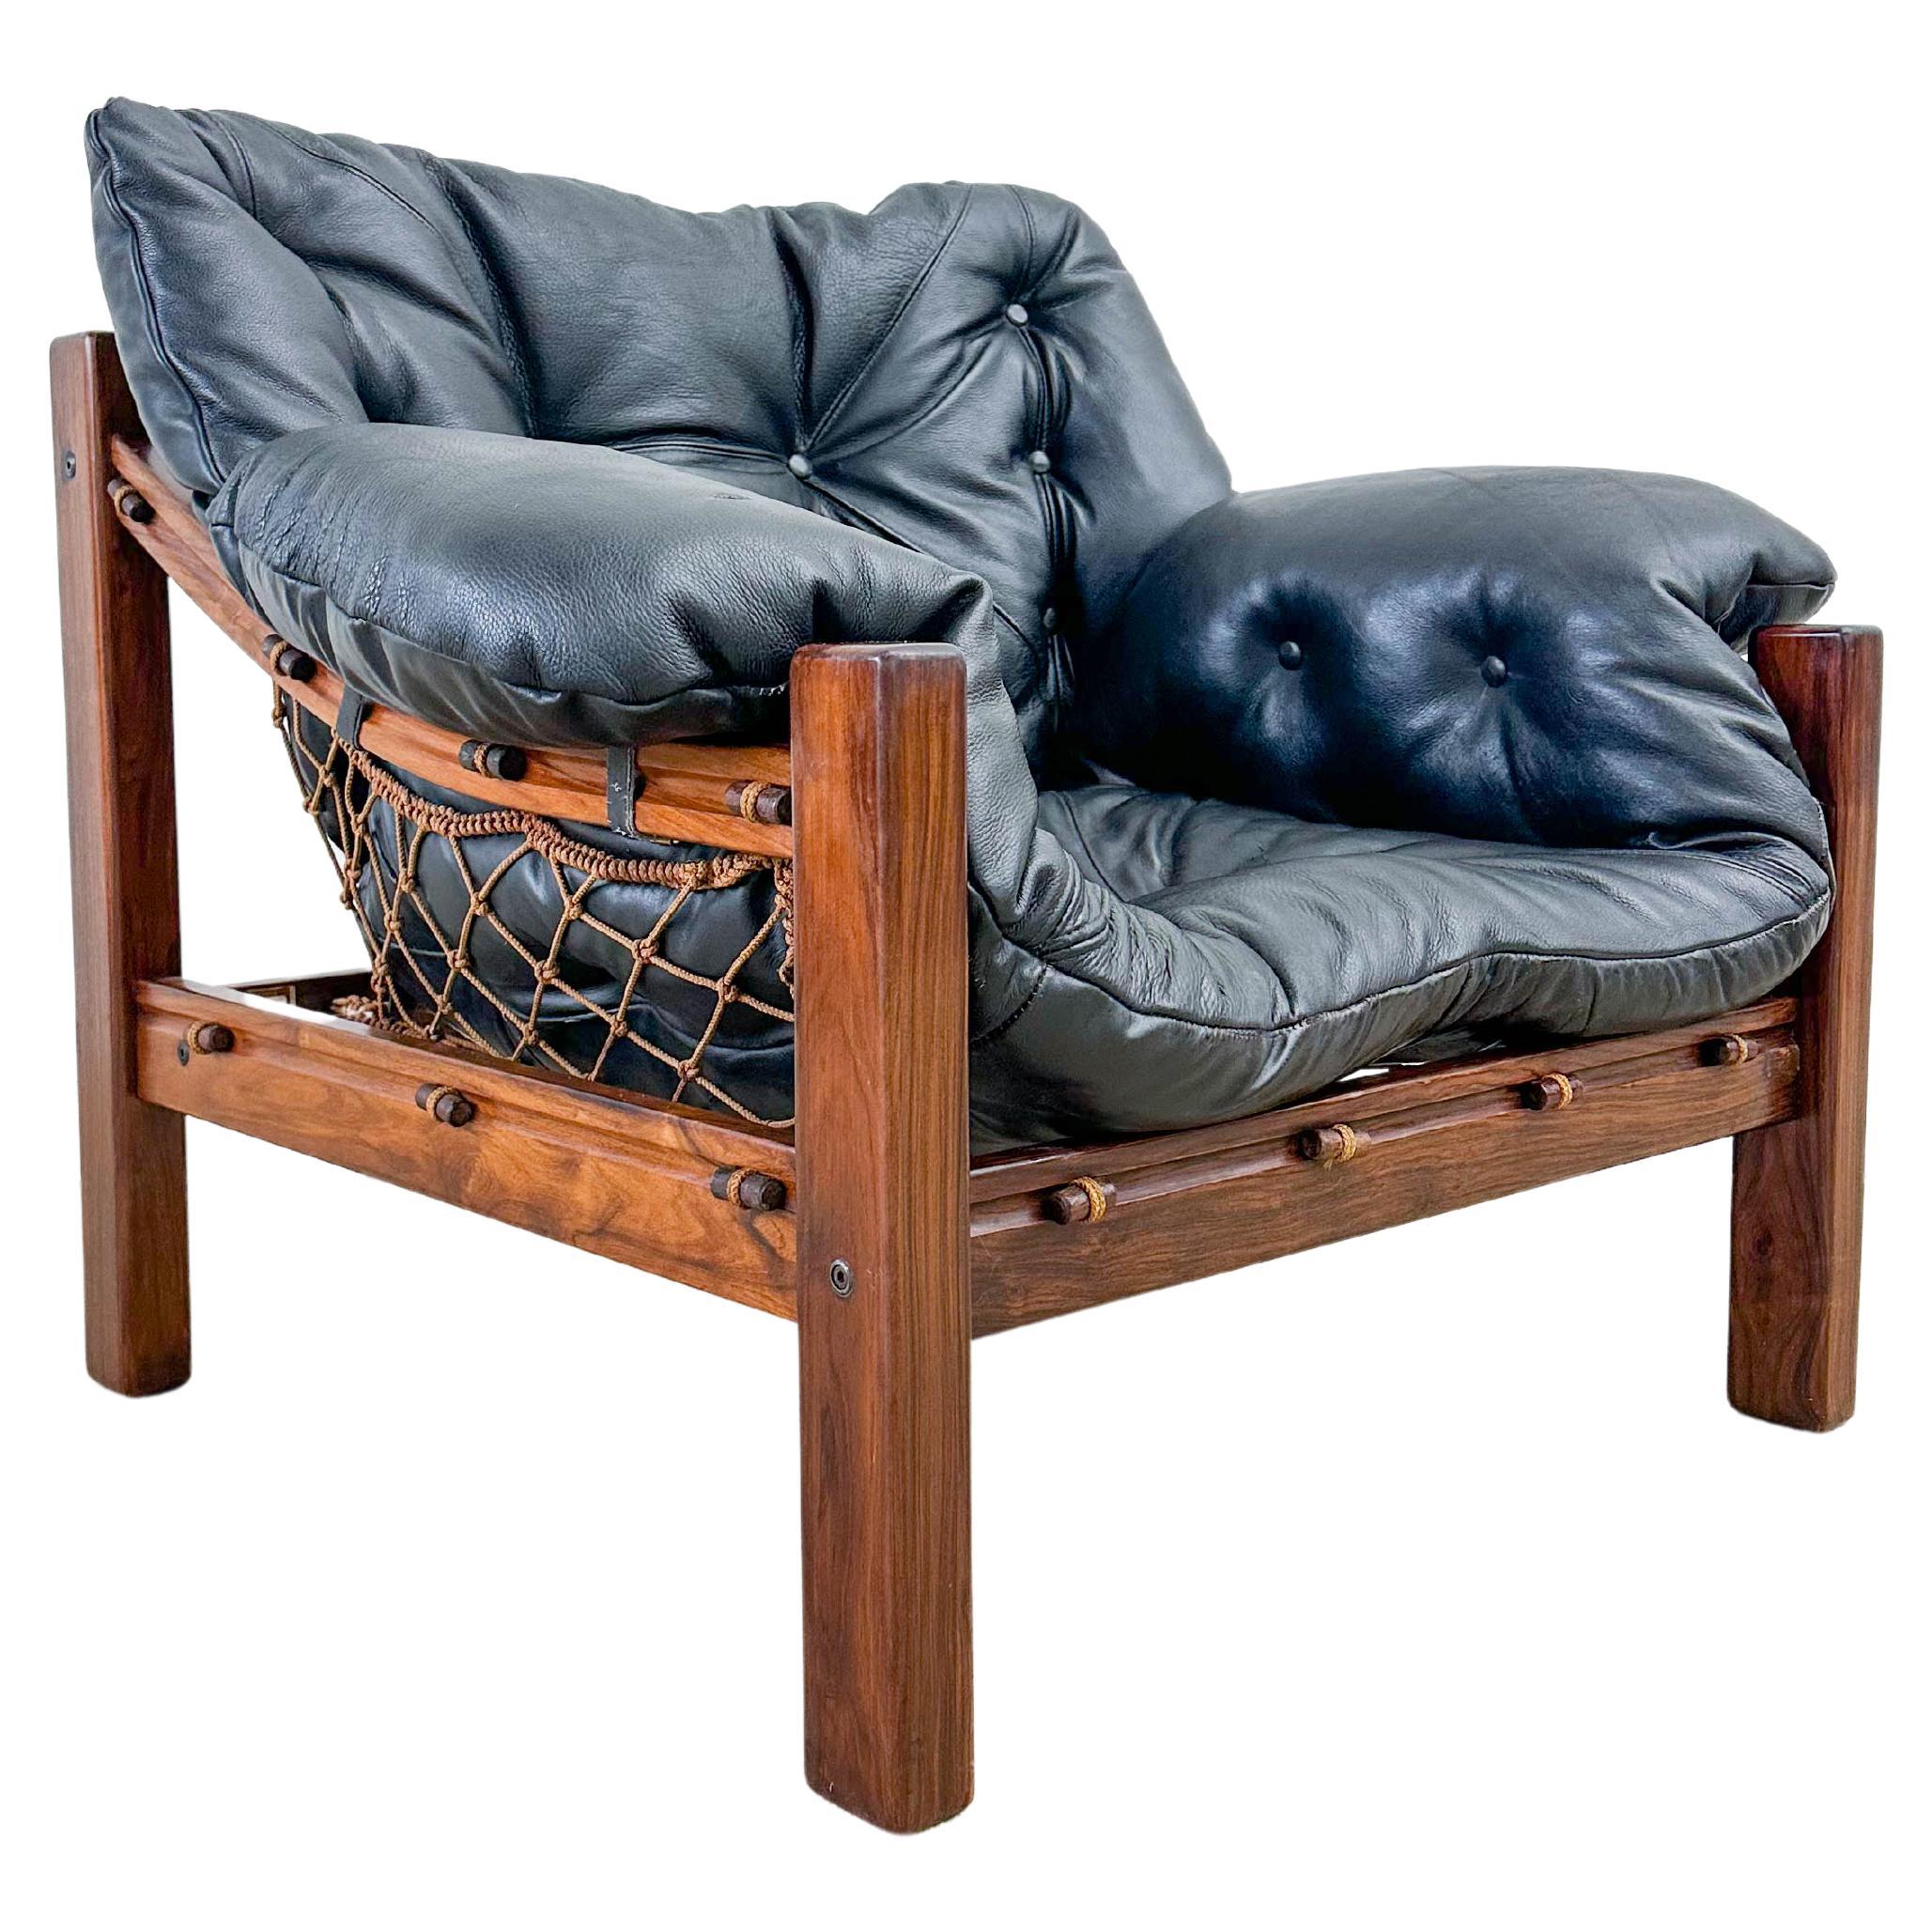 Jean Gillion Brazilian Rosewood and Leather Tijuca Lounge Chair For Sale